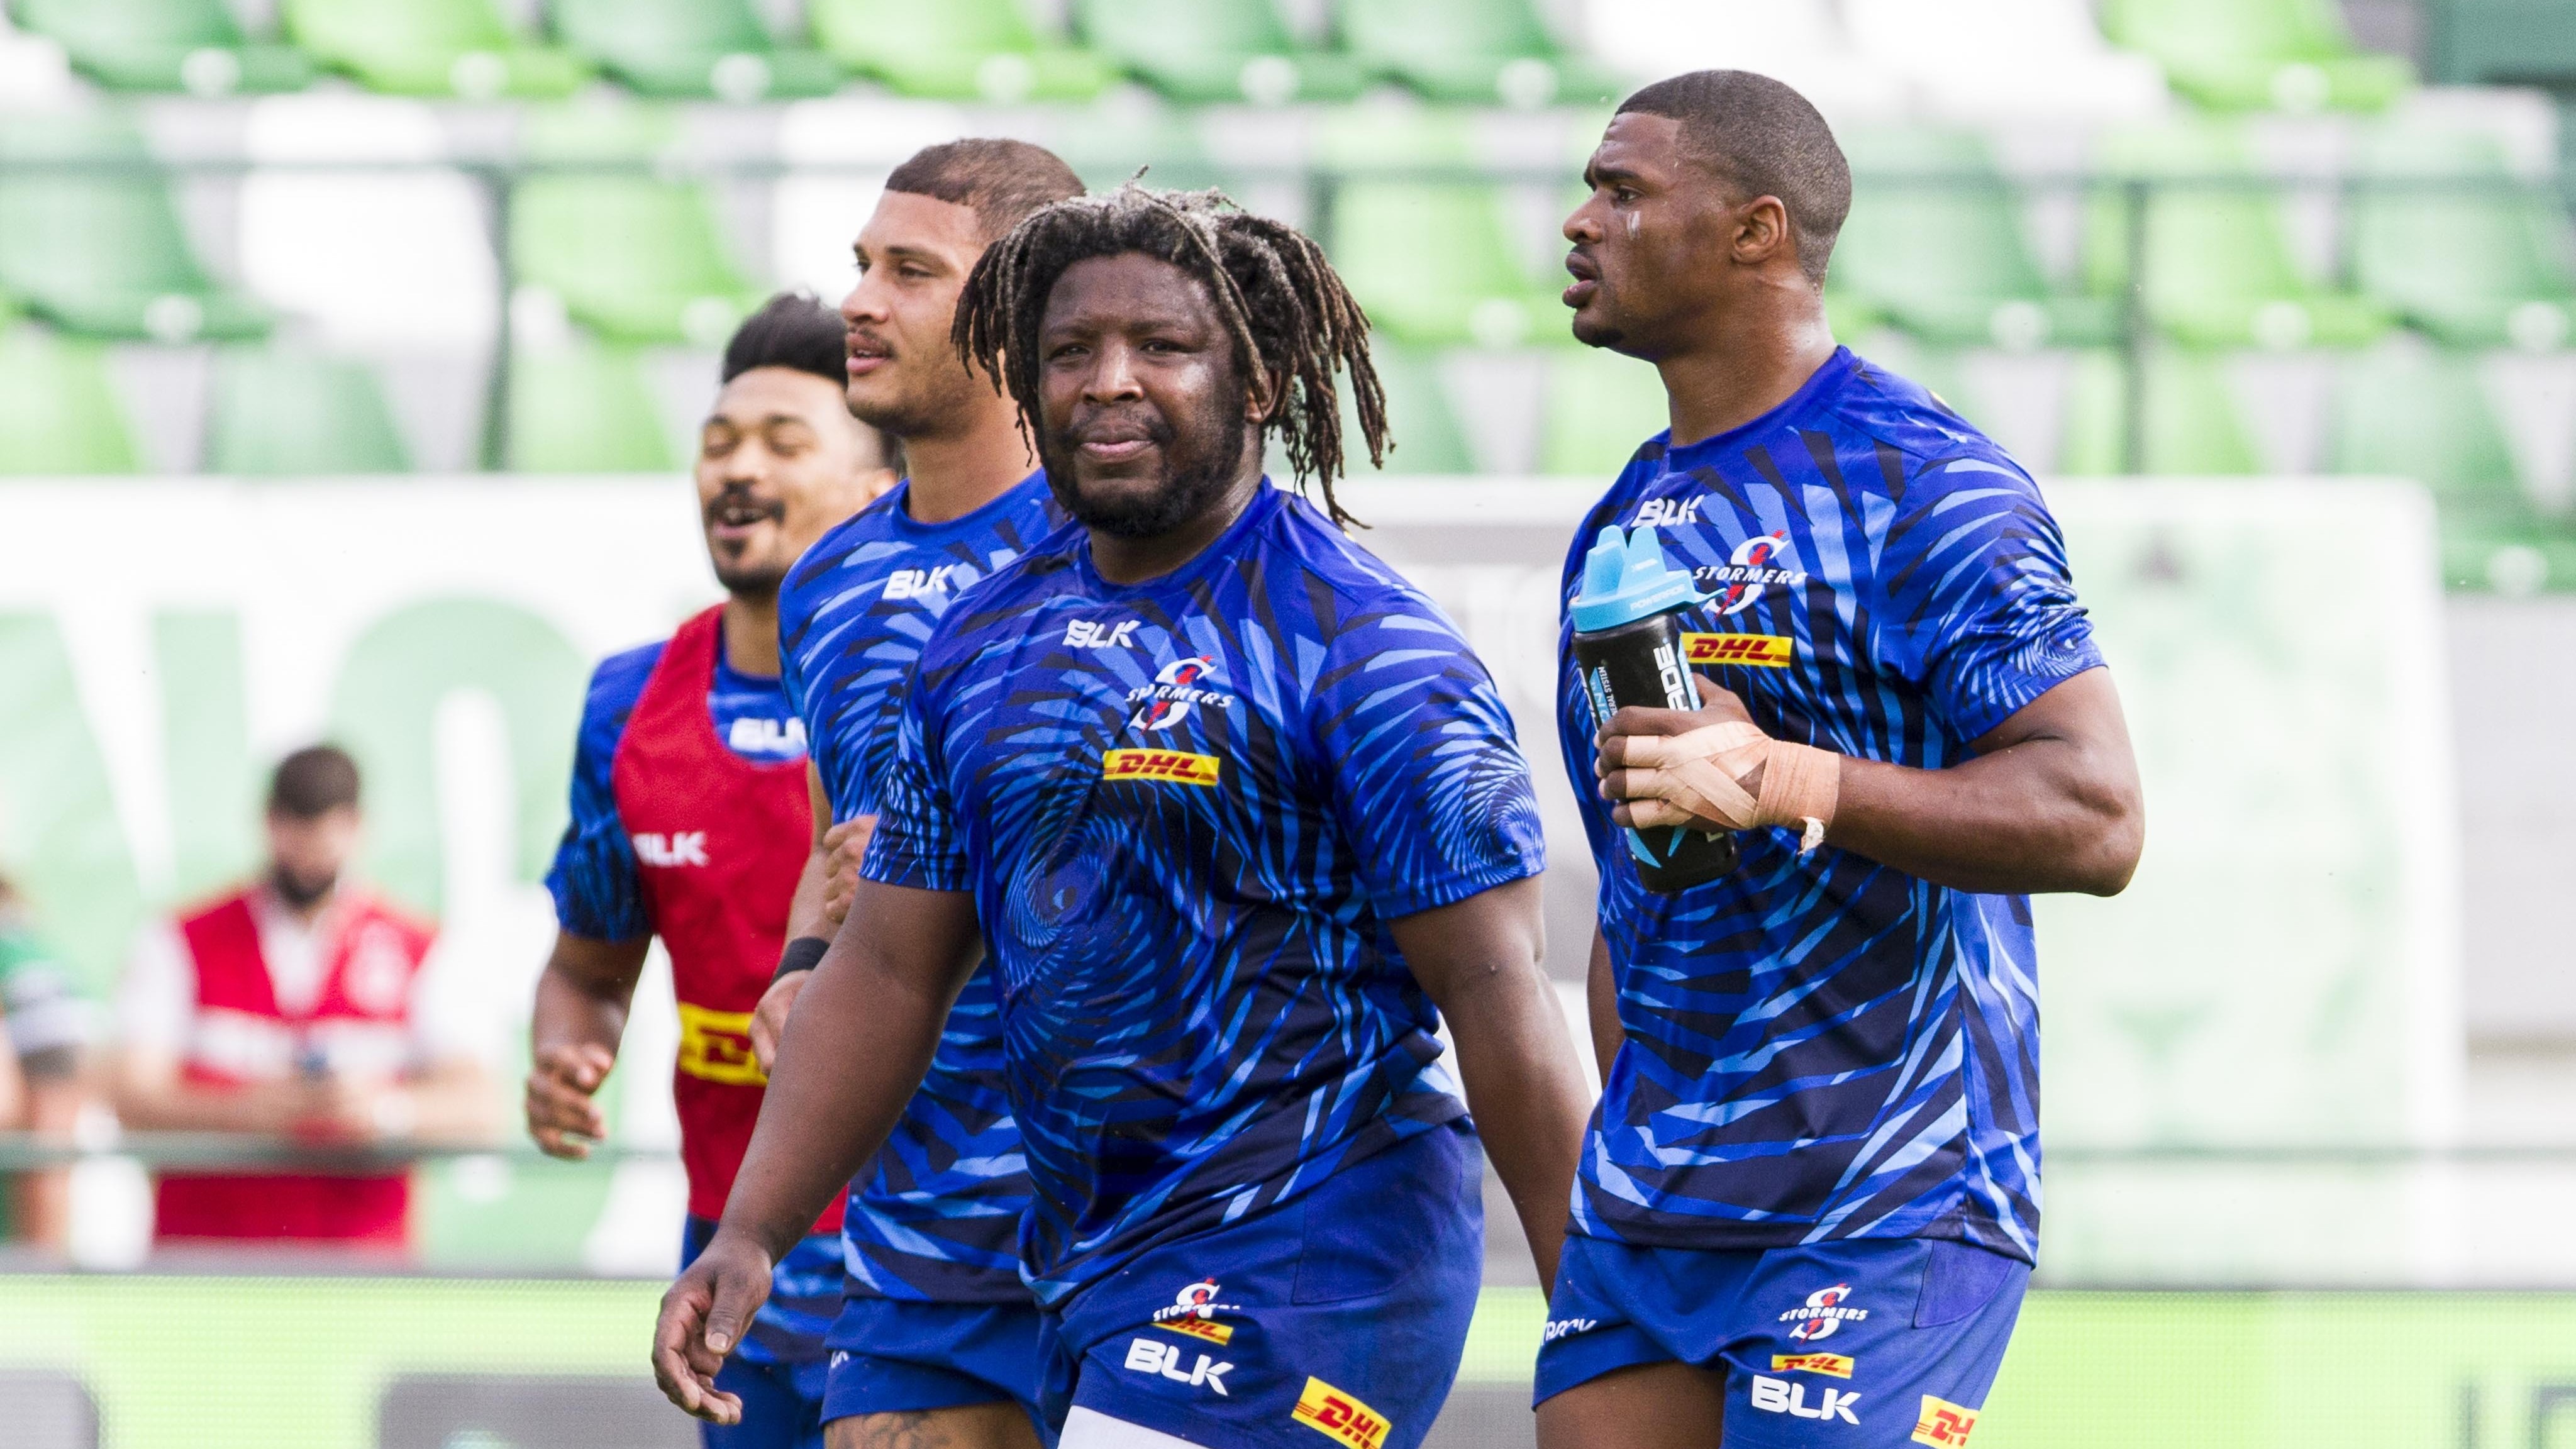 Mandatory Credit: Photo by Alfio Guarise/LiveMedia/Shutterstock (12465598b) Scarra Ntubeni United Rugby Championship match Benetton Rugby vs DHL Stormers, Treviso, Italy - 25 Sep 2021